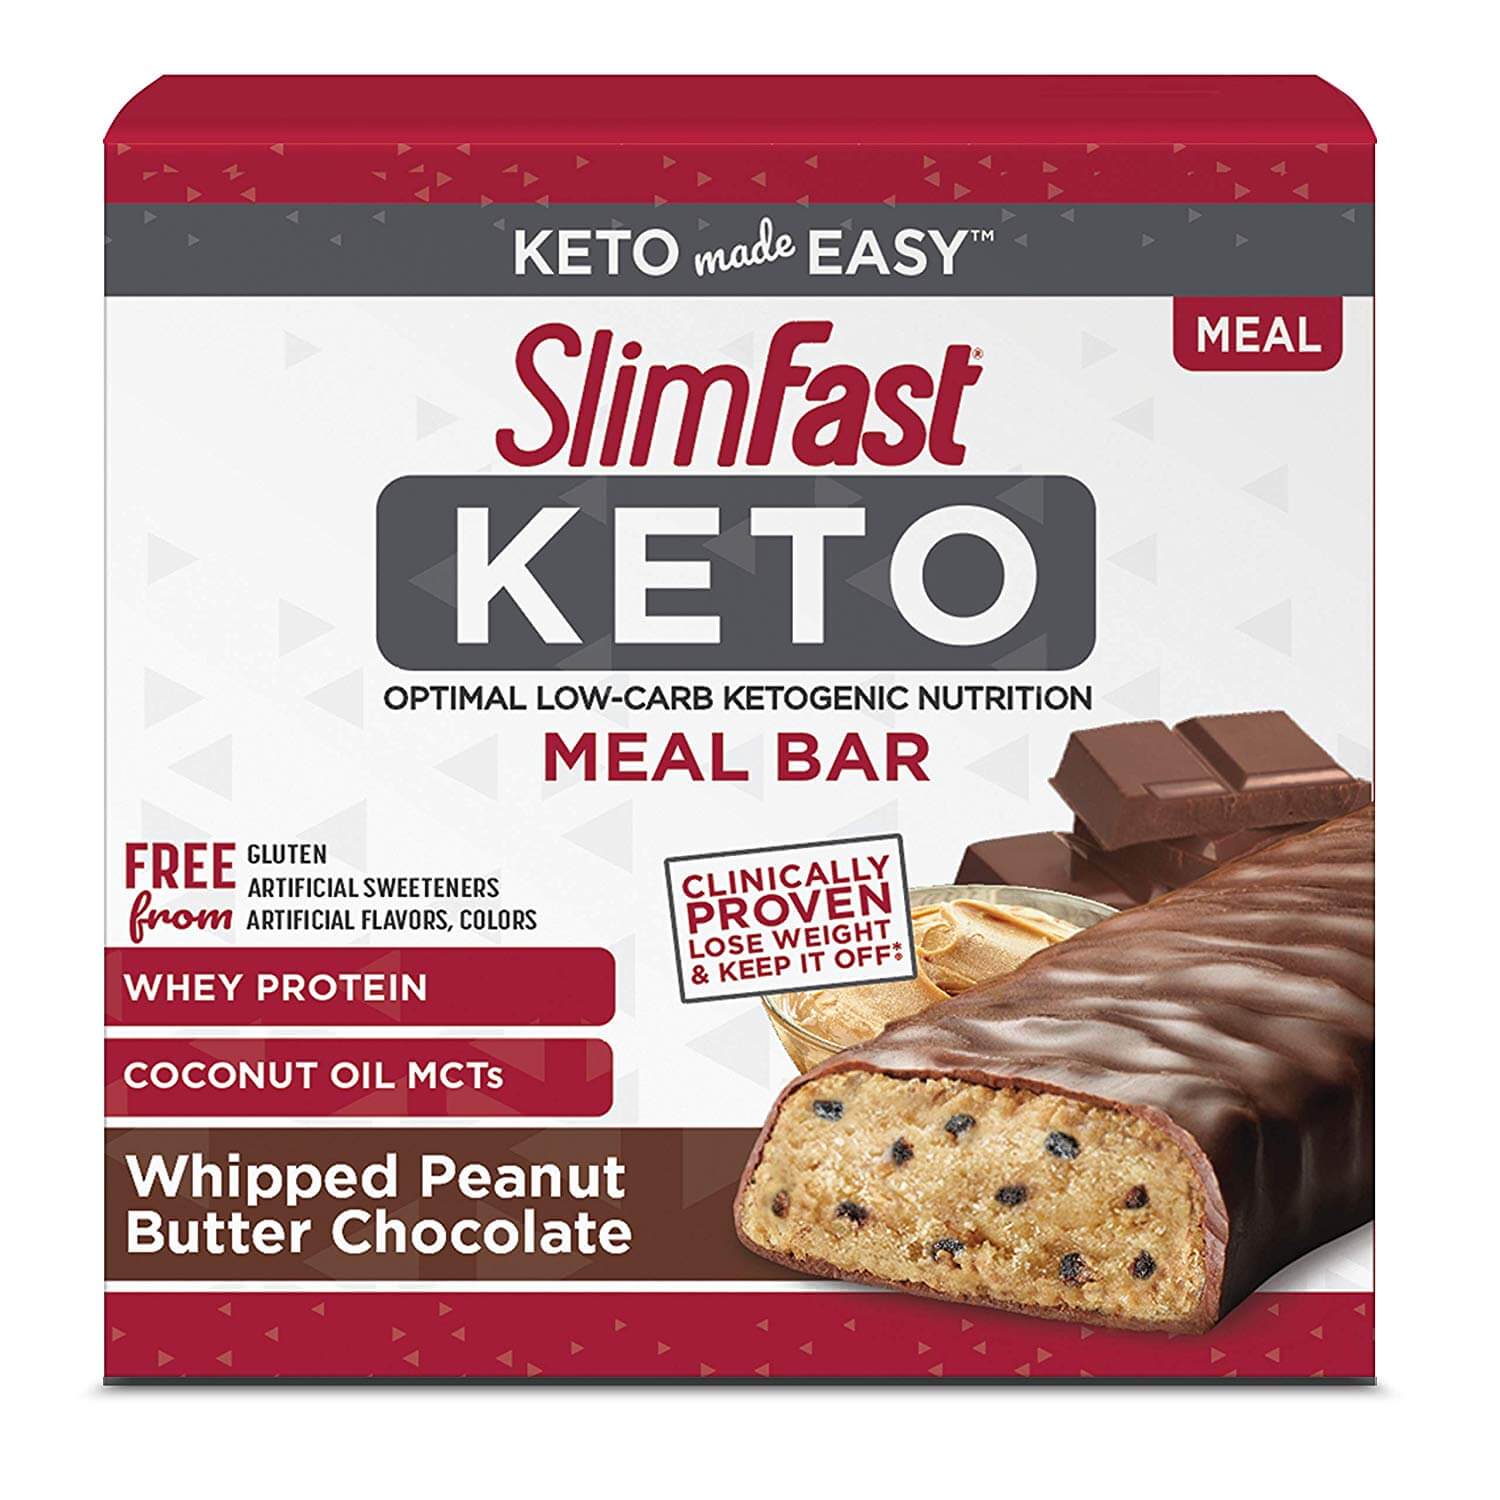 10 Inexpensive Keto Protein Bars In 2021 No3 Contain 1g Carbs Hnu 4035